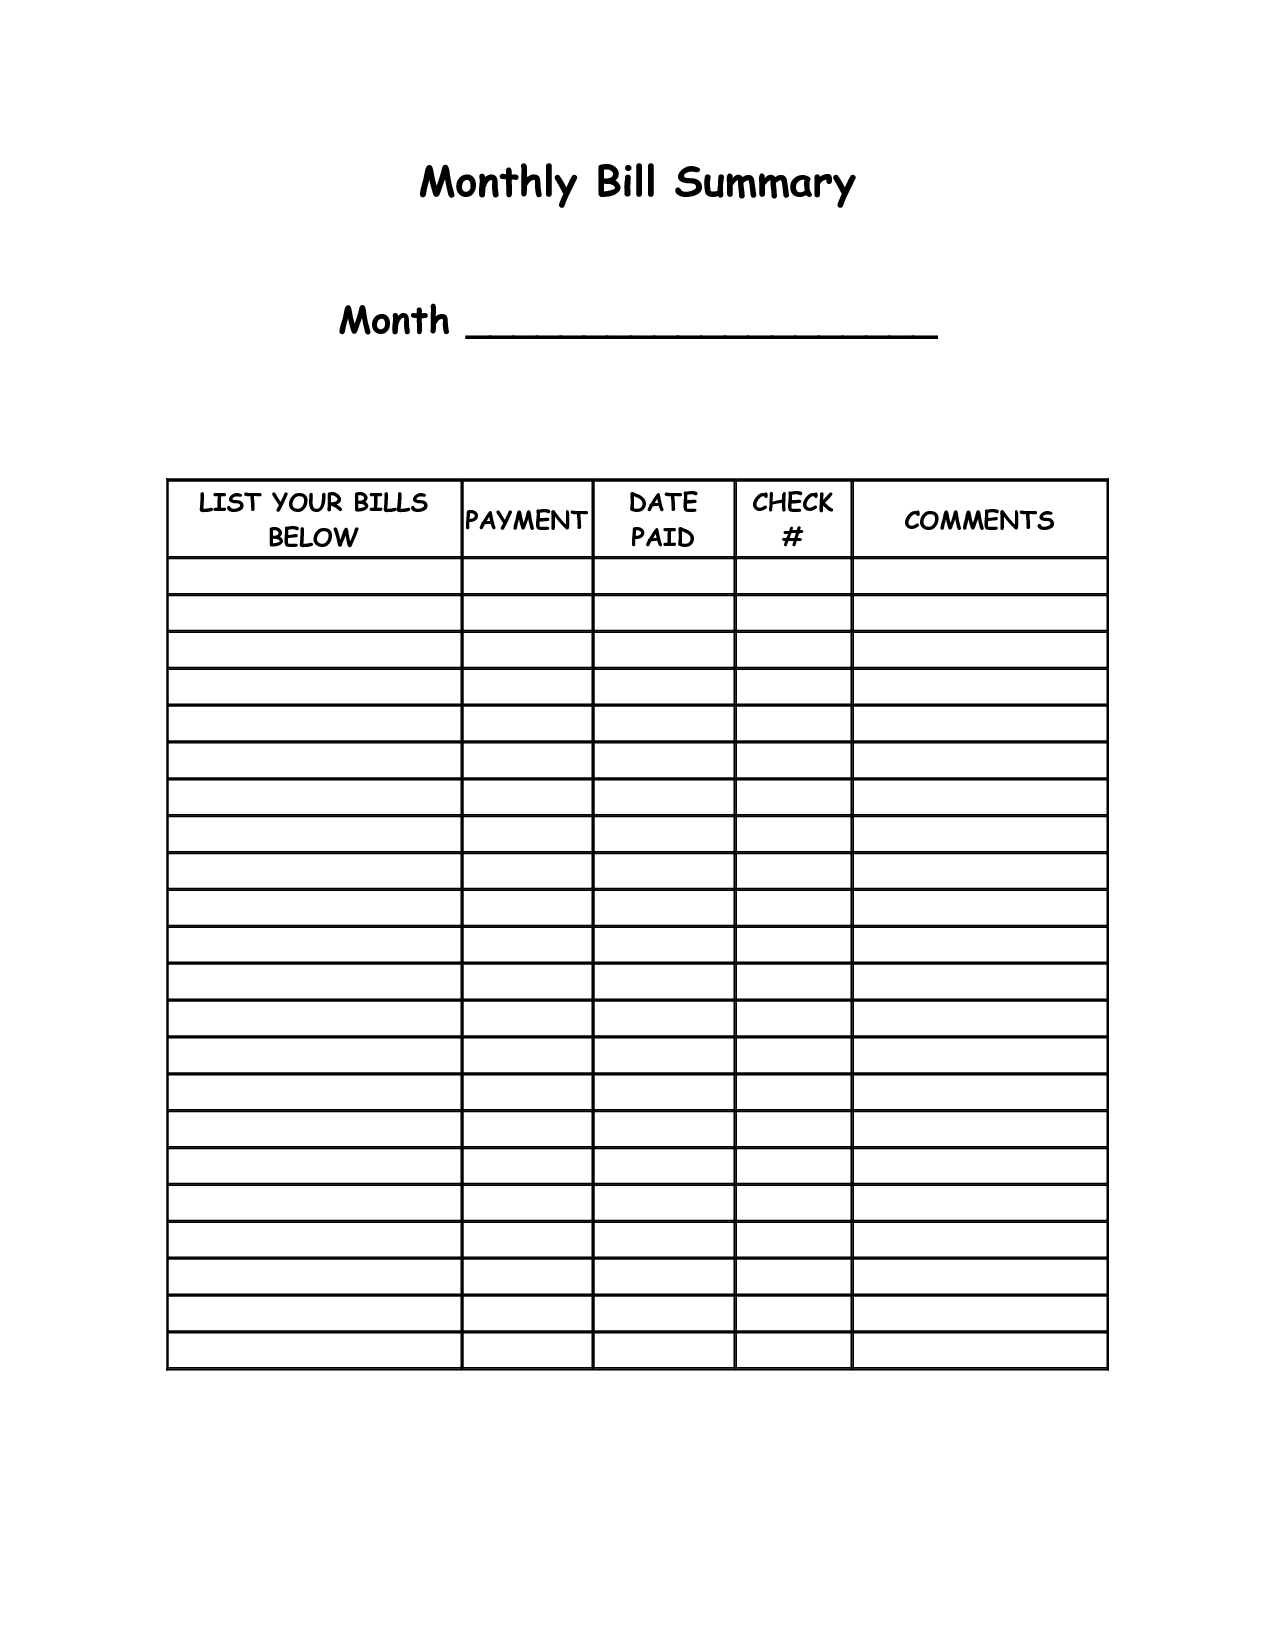 Monthly Bill Summary Doc | Organization | Organizing Monthly-Blank Template To List Monthly Billd